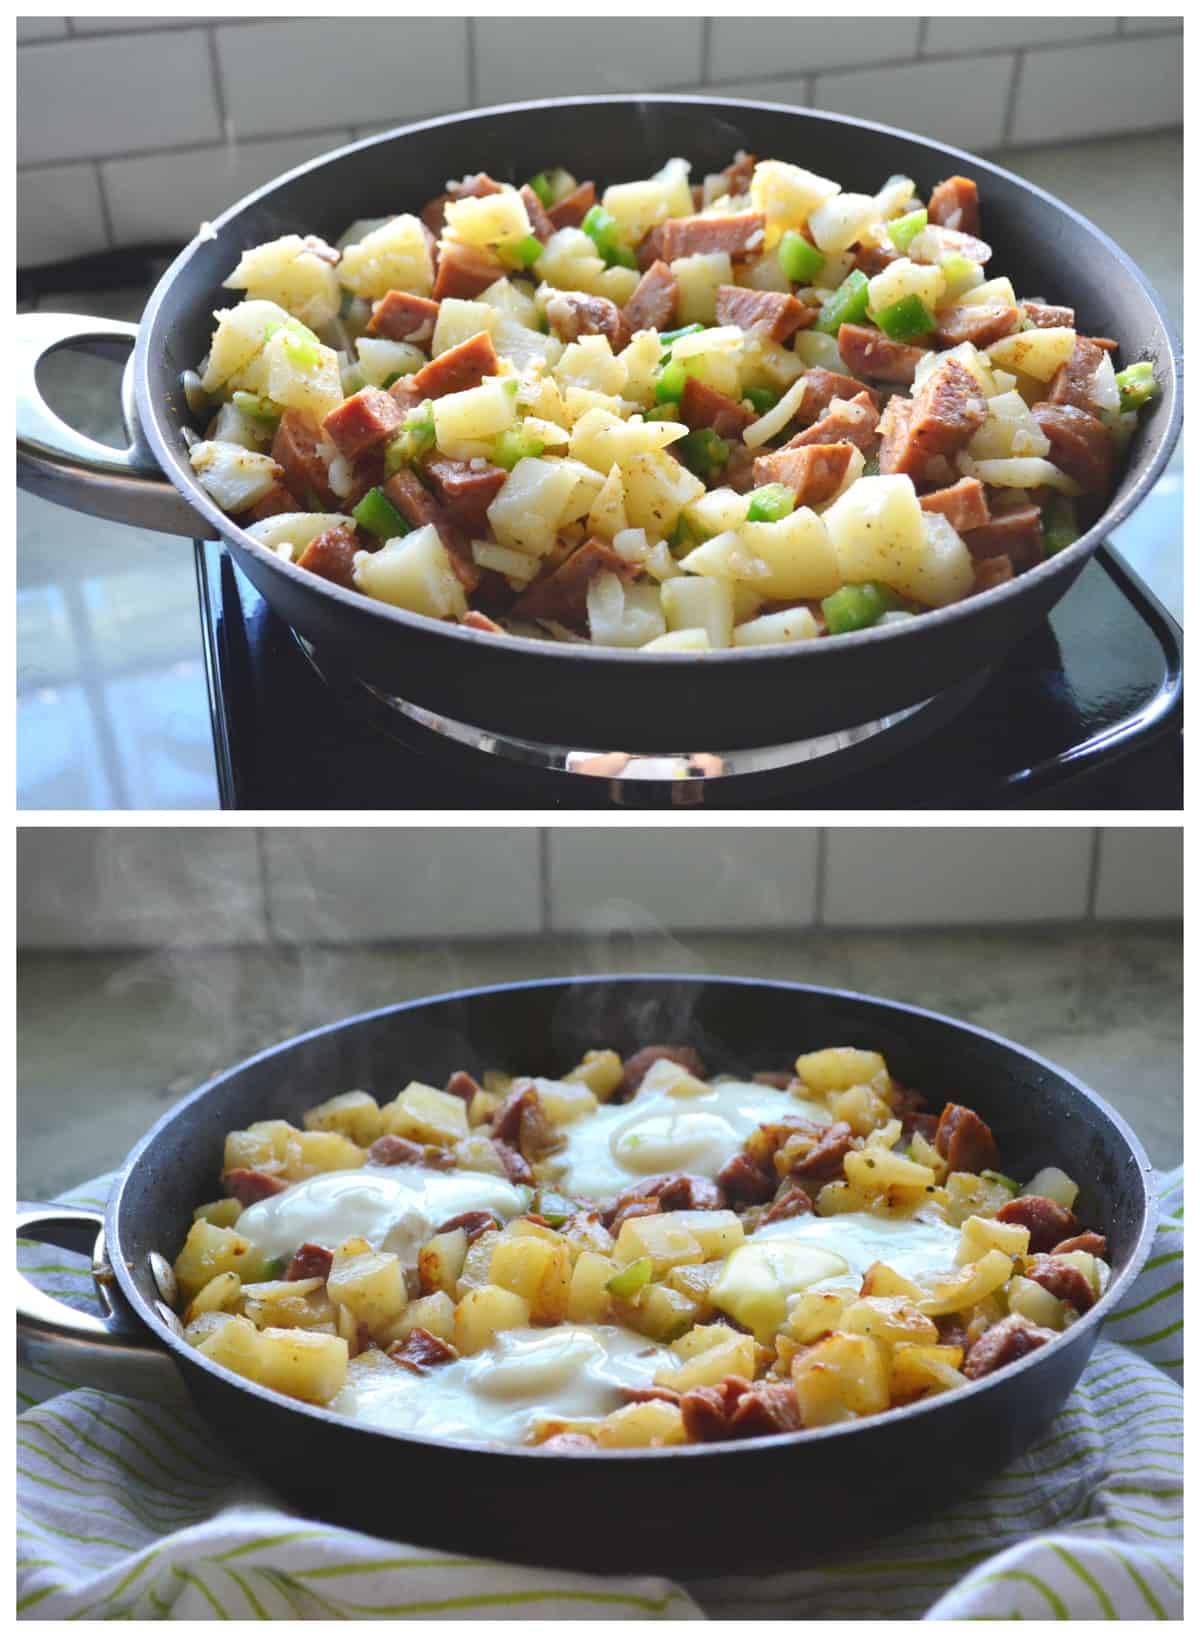 Two photos, both of potatoes, sausage, peppers and onions in a skillet.